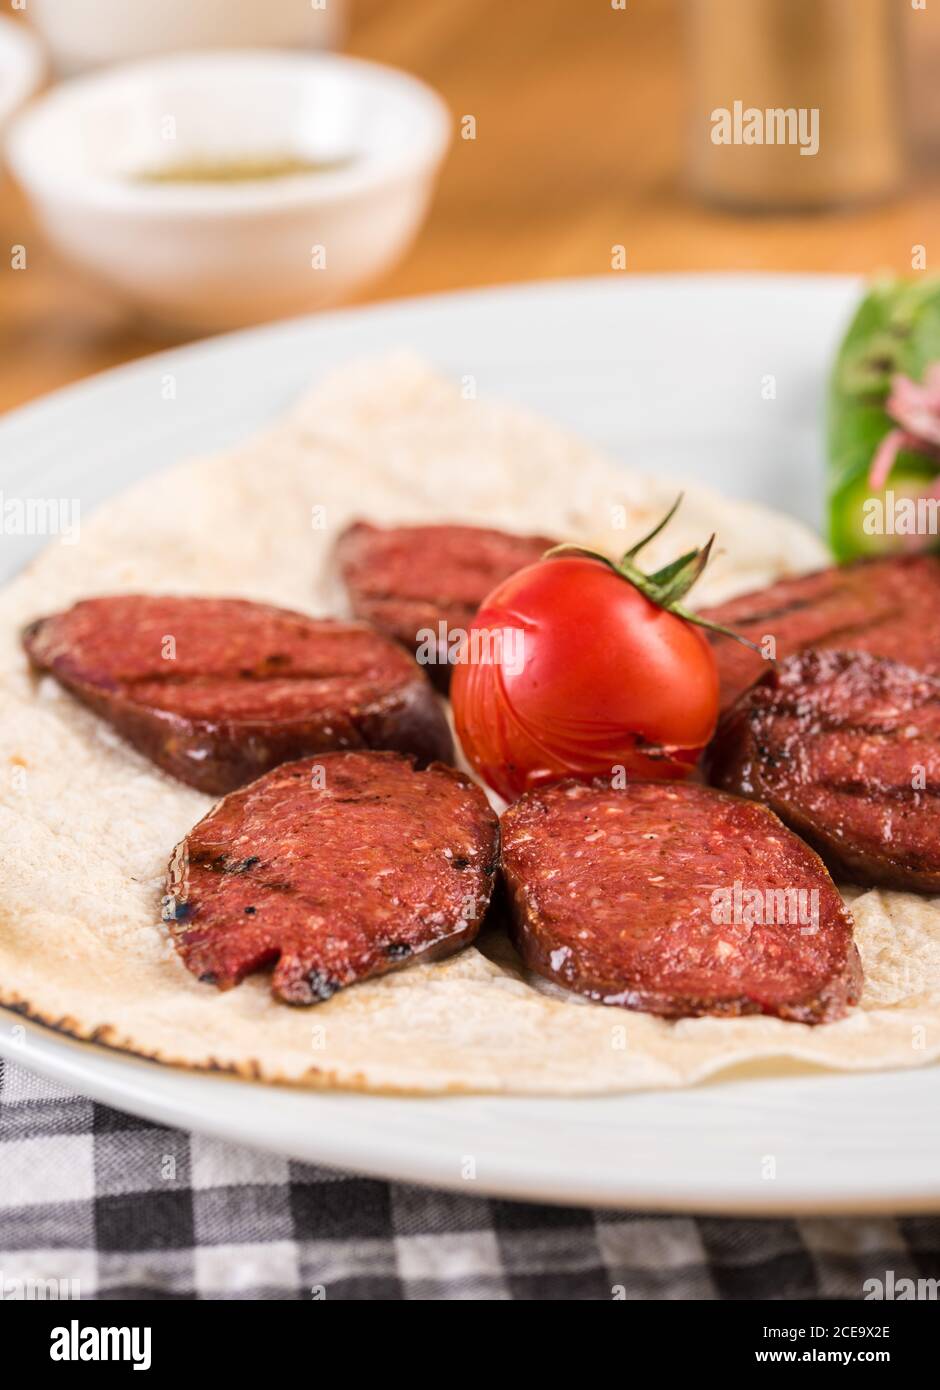 Sliced Turkish sausage on white plate cooked on the grill Stock Photo